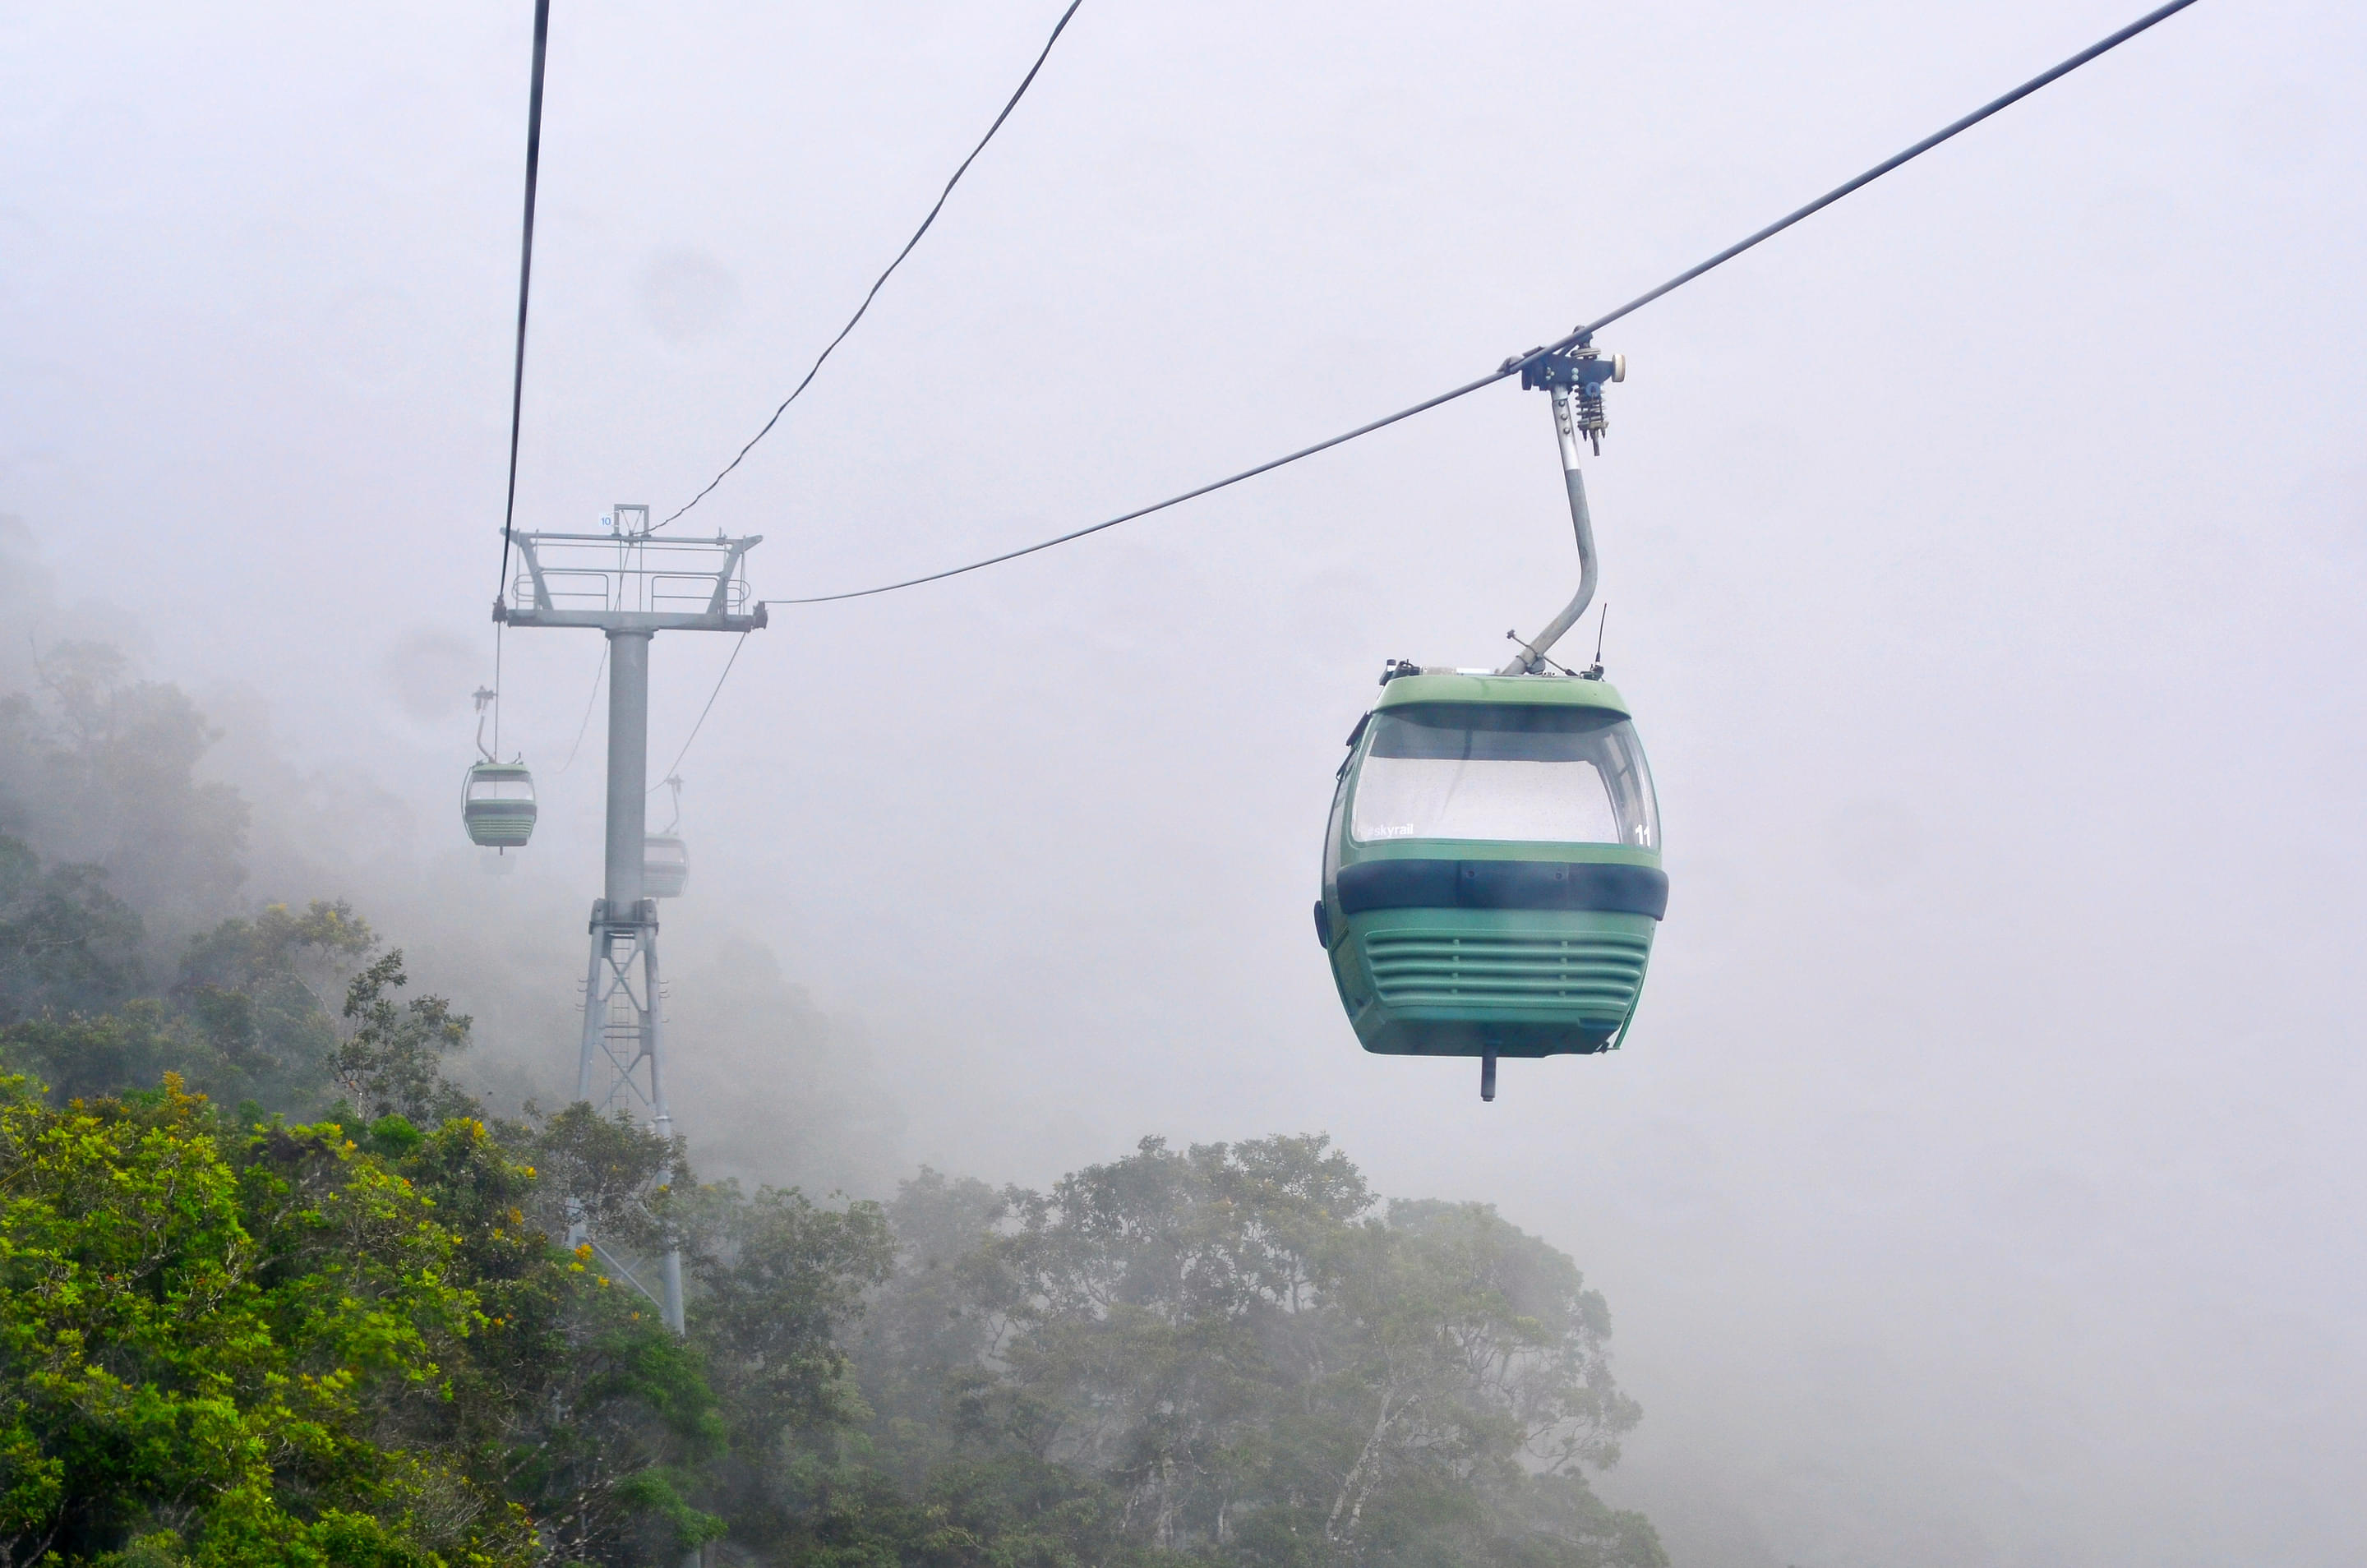 Skyrail Rainforest Cableway Overview